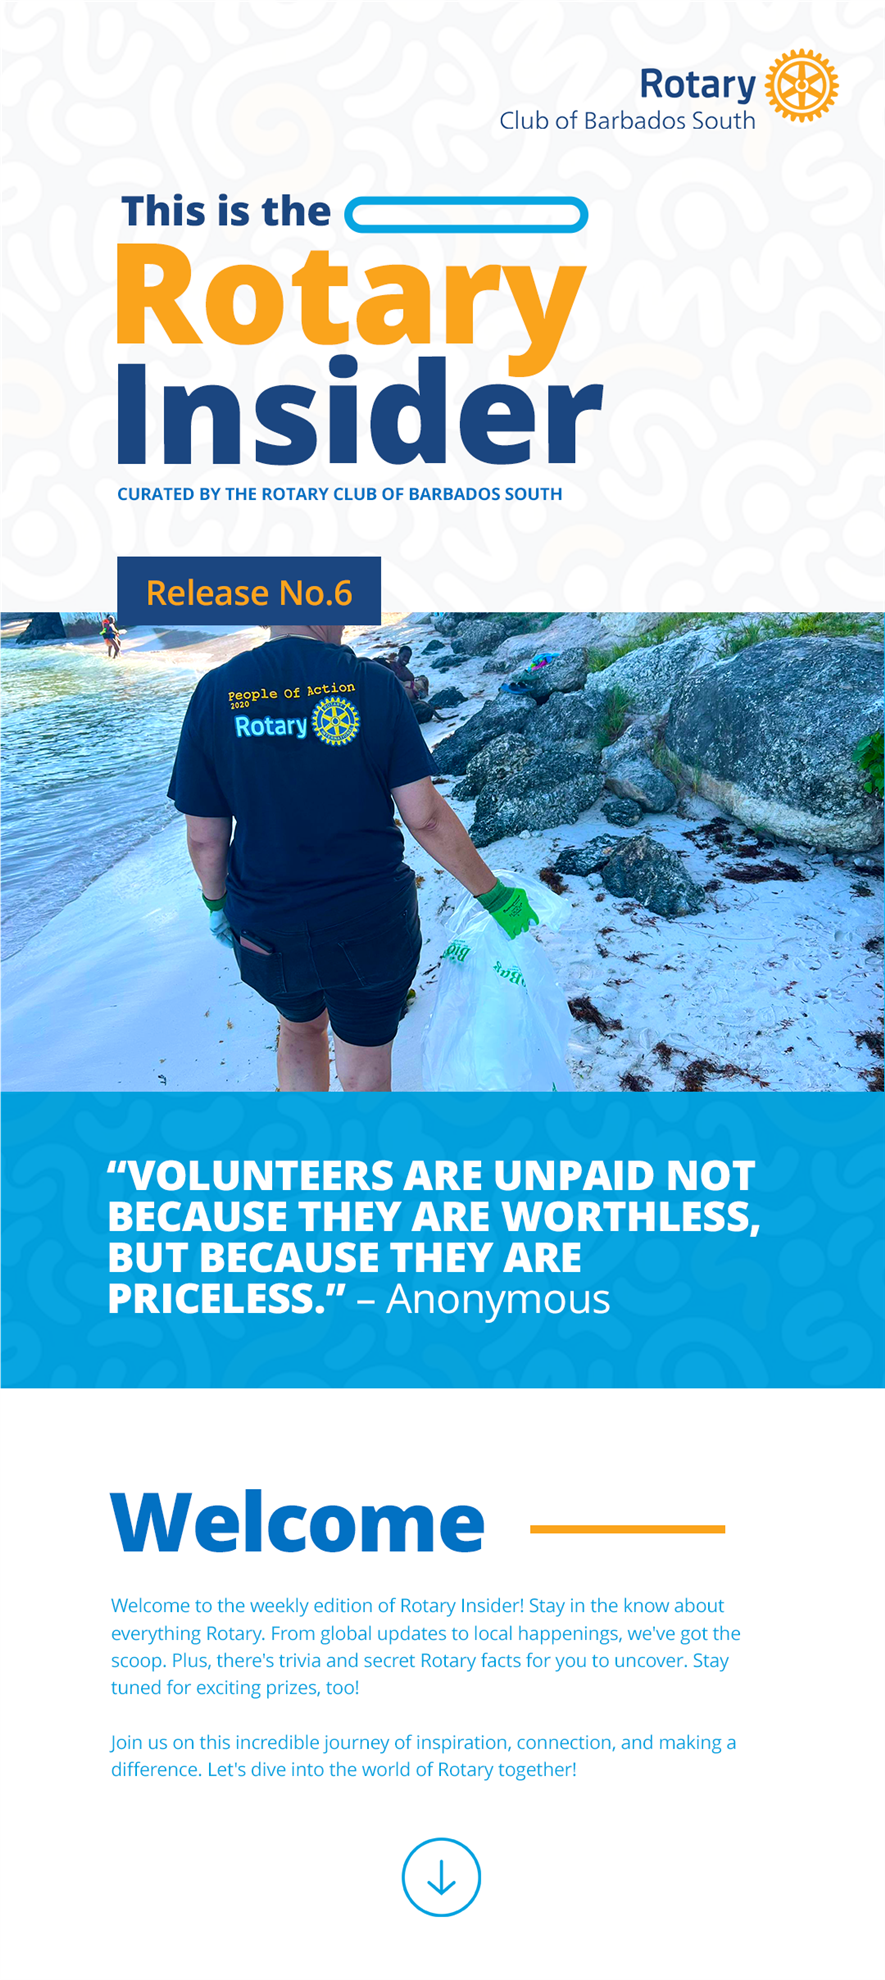 This is the Rotary Insider curated by the Rotary Club of Barbados South Release No.6.   Image: PDG Sonya Alleyne collecting garbage at a beach clean up at Enterprise Beach.  Quote: “Volunteers are unpaid not because they are worthless, but because they are priceless.” – Anonymous  Welcome to the weekly edition of Rotary Insider! Stay in the know about everything Rotary. From global updates to local happenings, we've got the scoop. Plus, there's trivia and secret Rotary facts for you to uncover. Stay tuned for exciting prizes, too!   Join us on this incredible journey of inspiration, connection, and making a difference. Let's dive into the world of Rotary together!